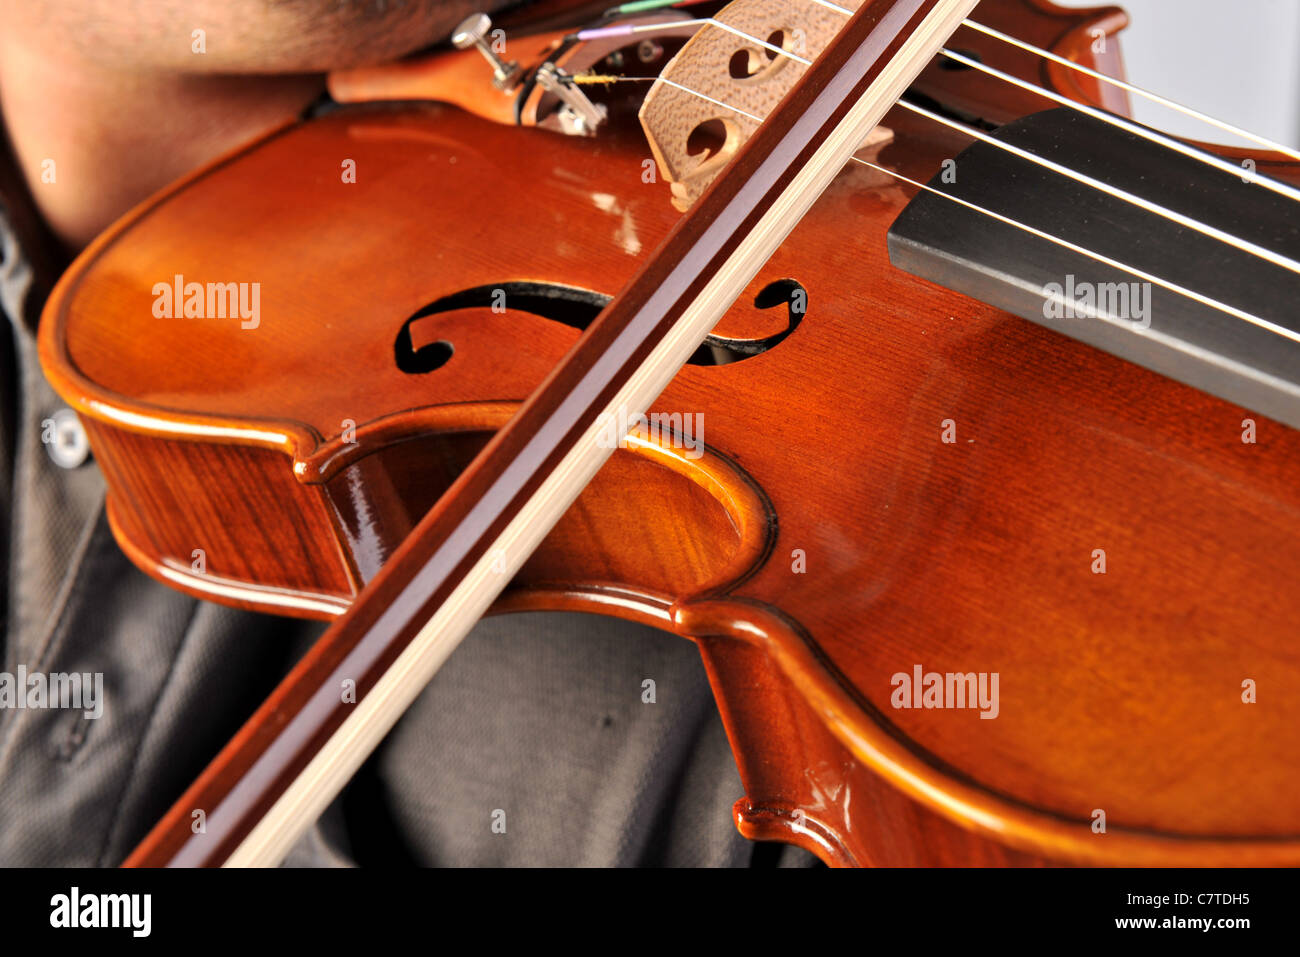 Violin is in the hands of professional violinist. Stock Photo